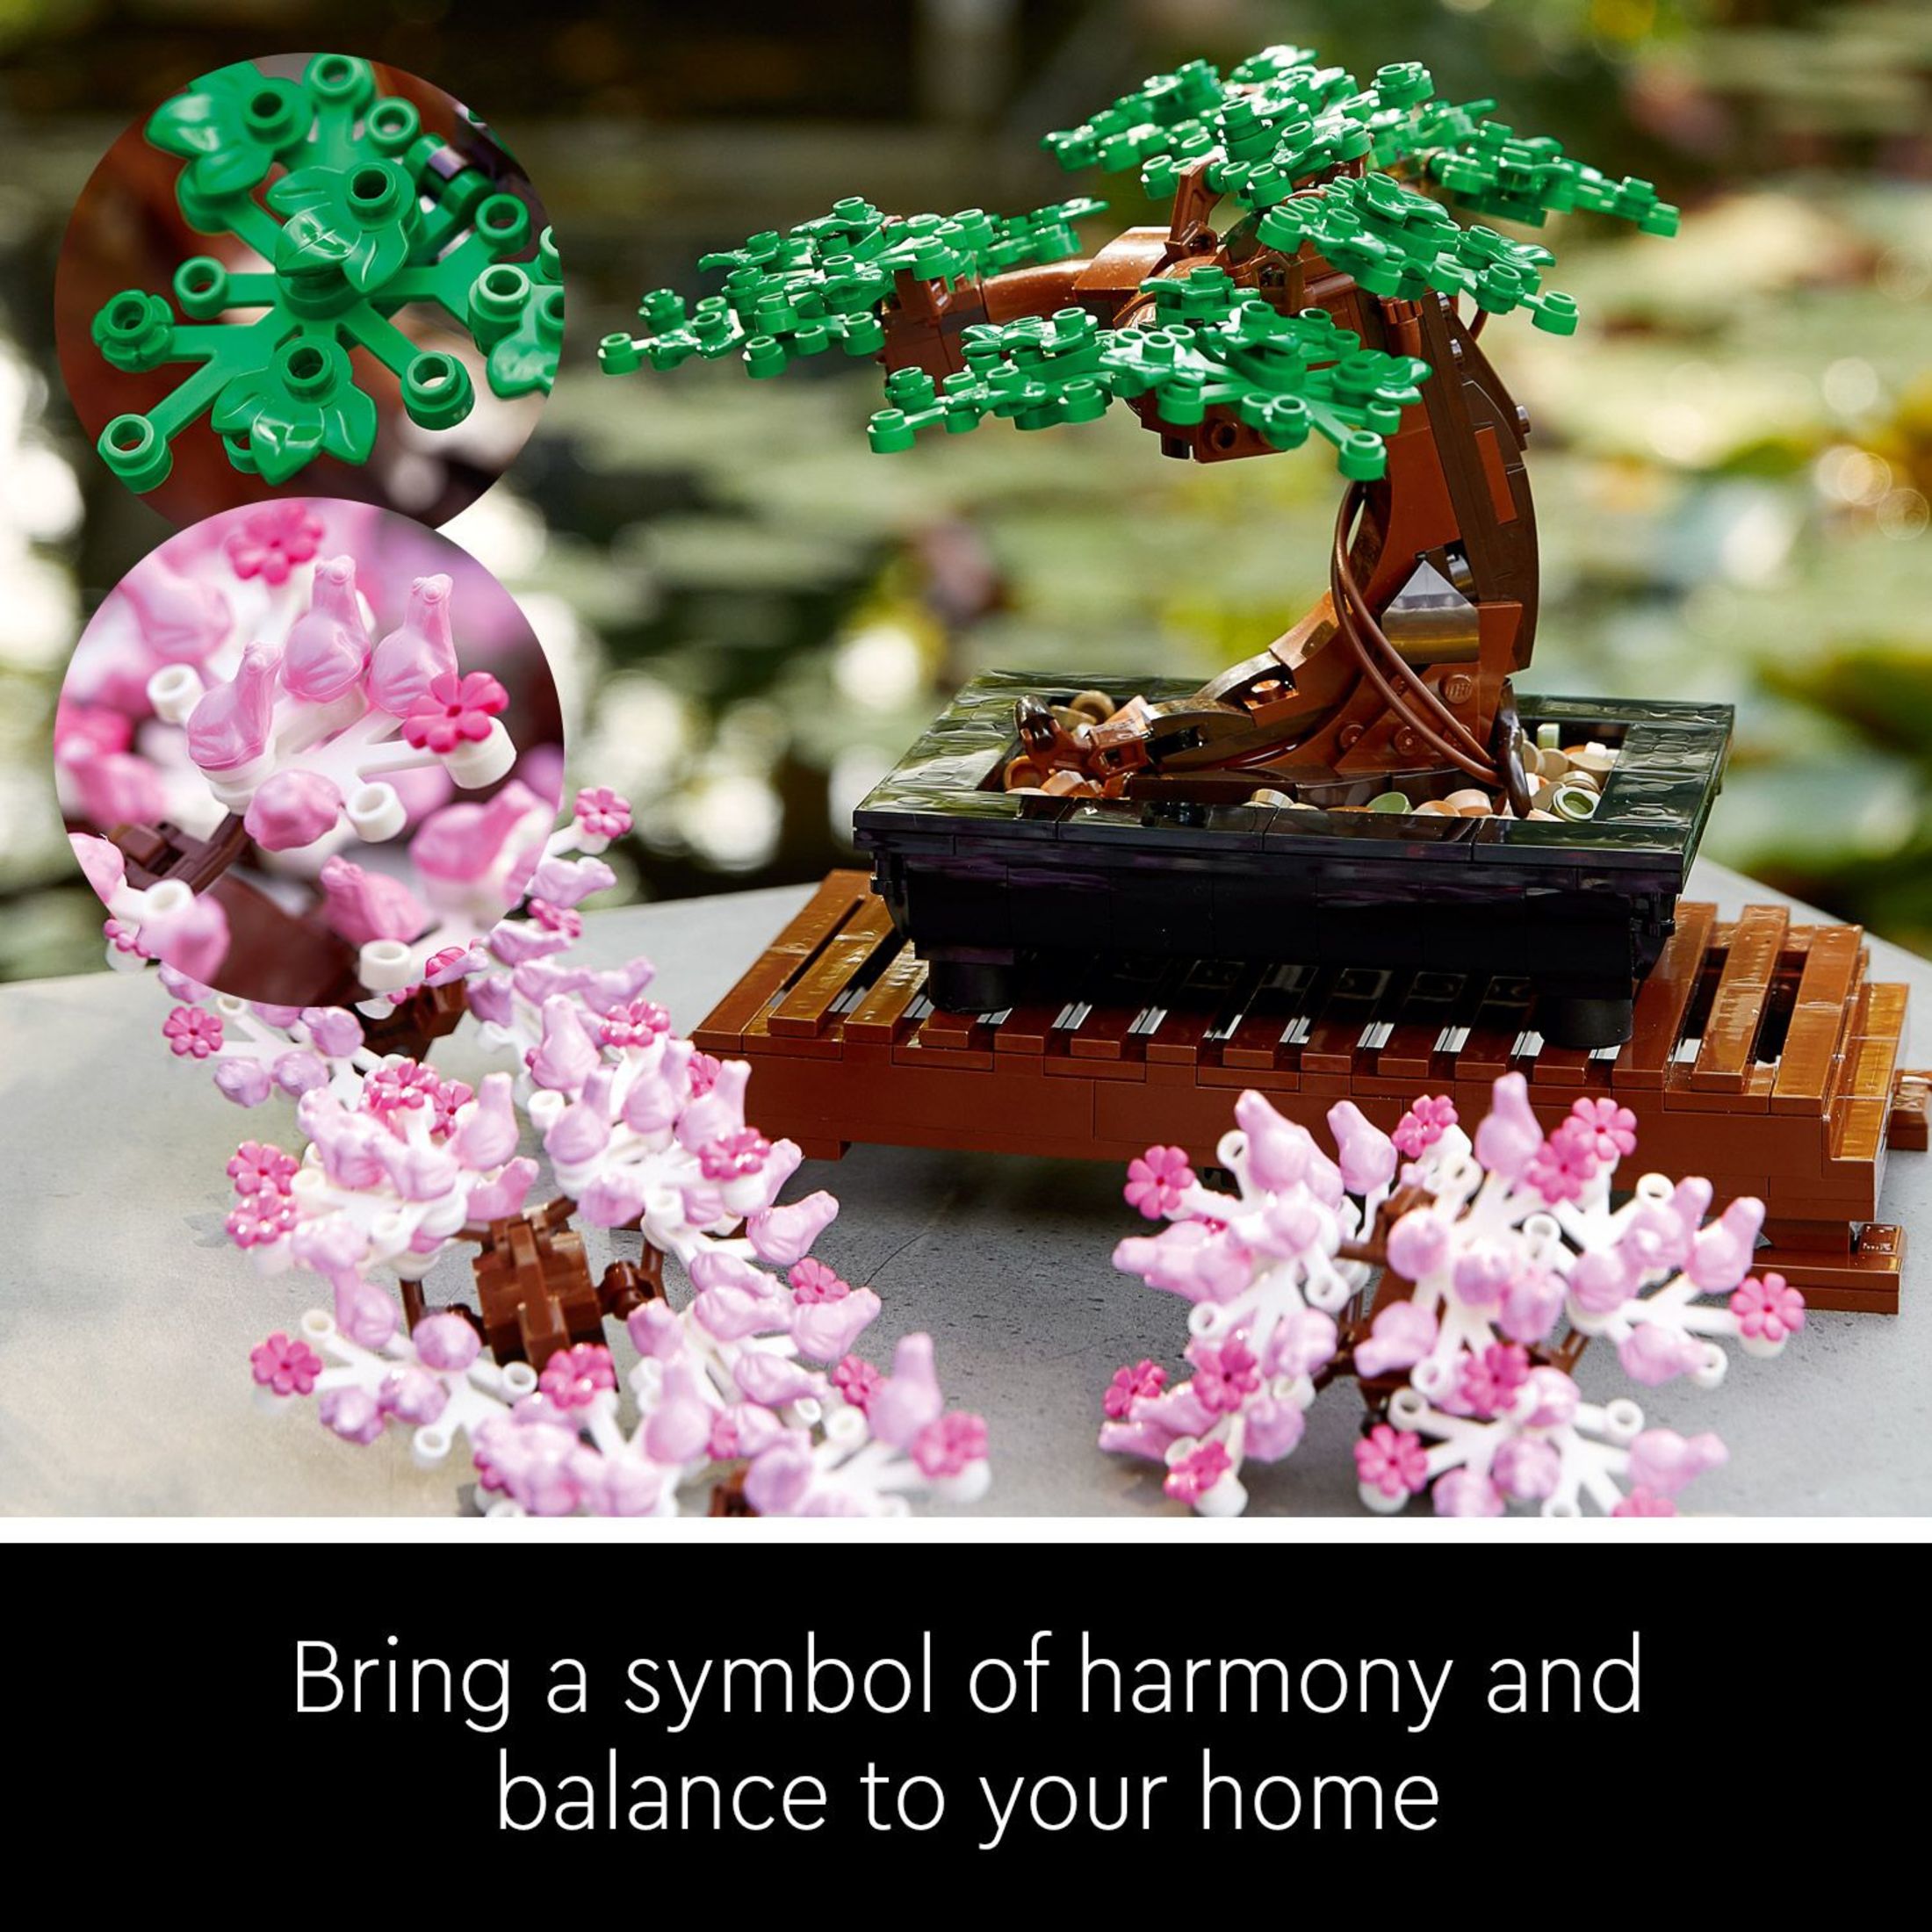 LEGO Icons Bonsai Tree Building Set, Features Cherry Blossom Flowers, Adult DIY Plant Model, Creative Gift for Home Décor, Office Art or Mother's Day Decoration, Botanical Collection Design Kit, 10281 - image 5 of 9